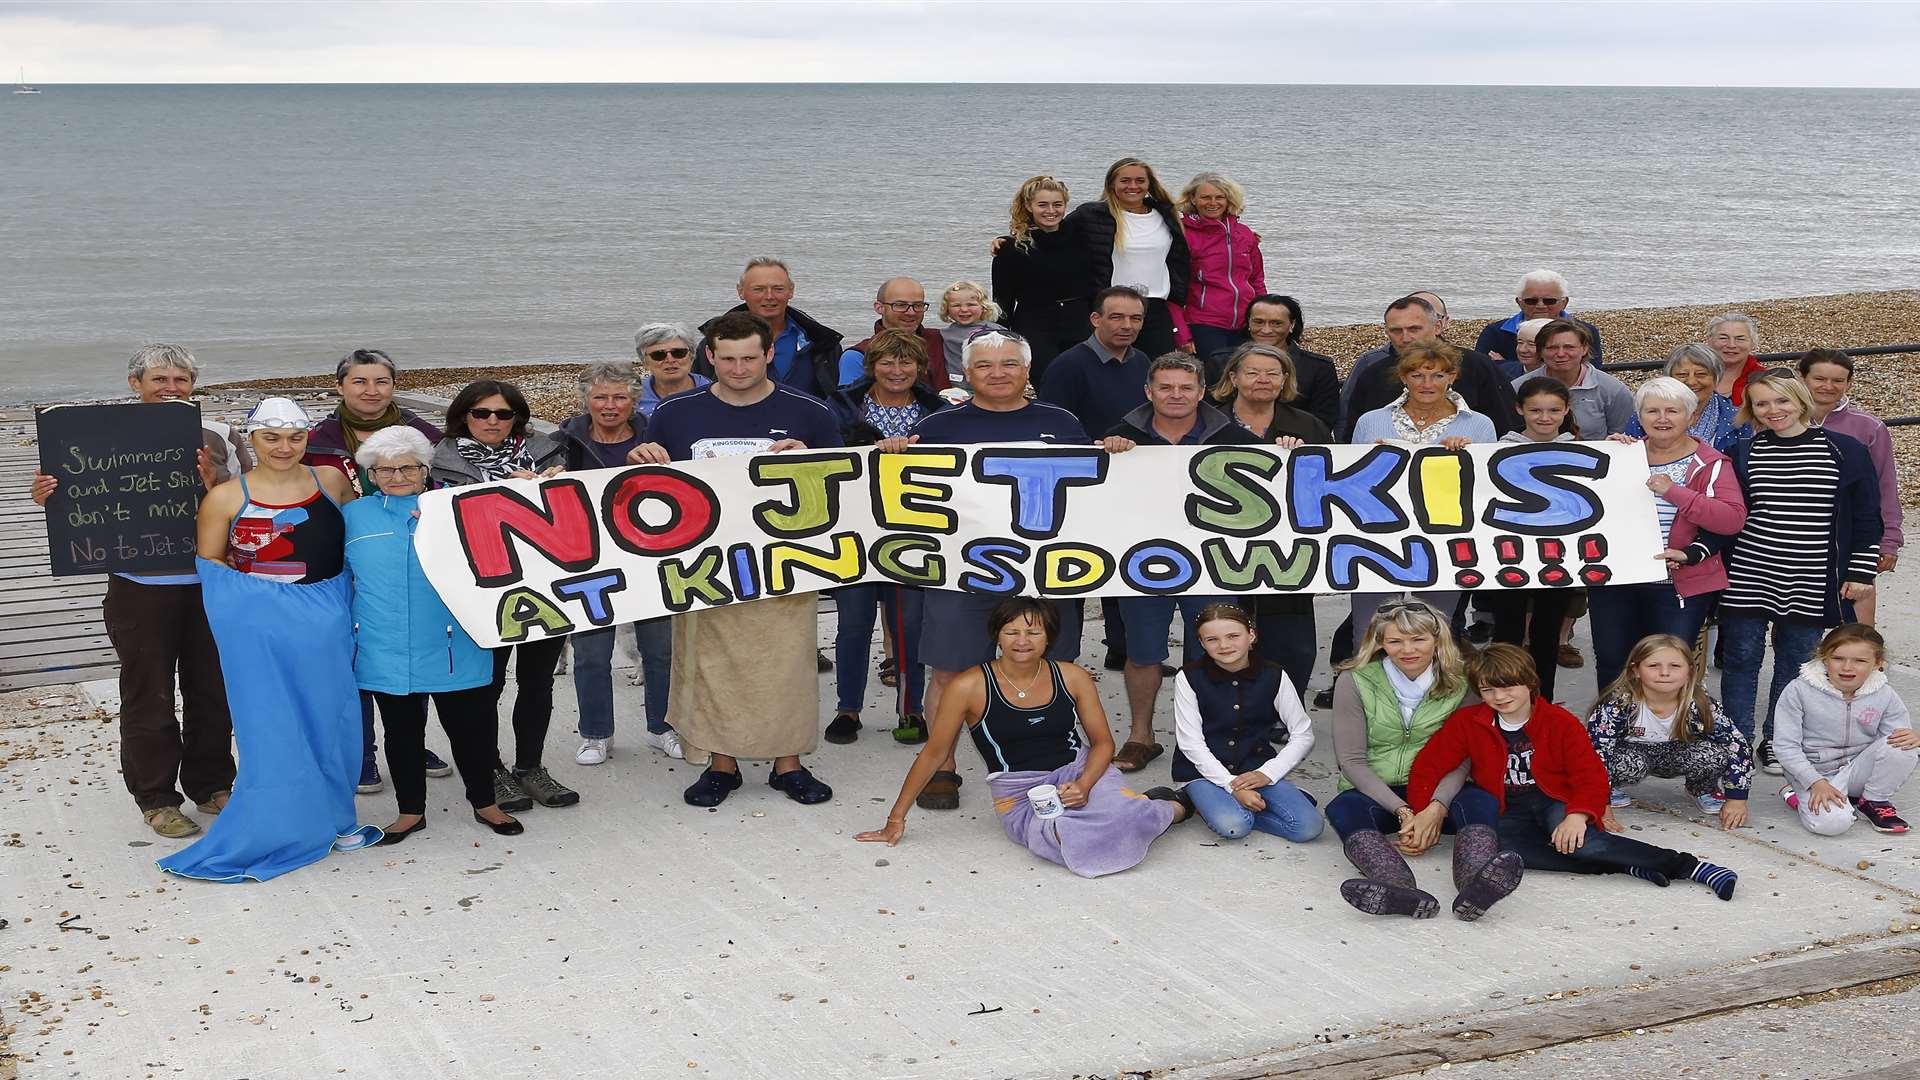 Kingsdown Crawlers Swimming Club are opposing jet ski use of the ramp because it is a danger